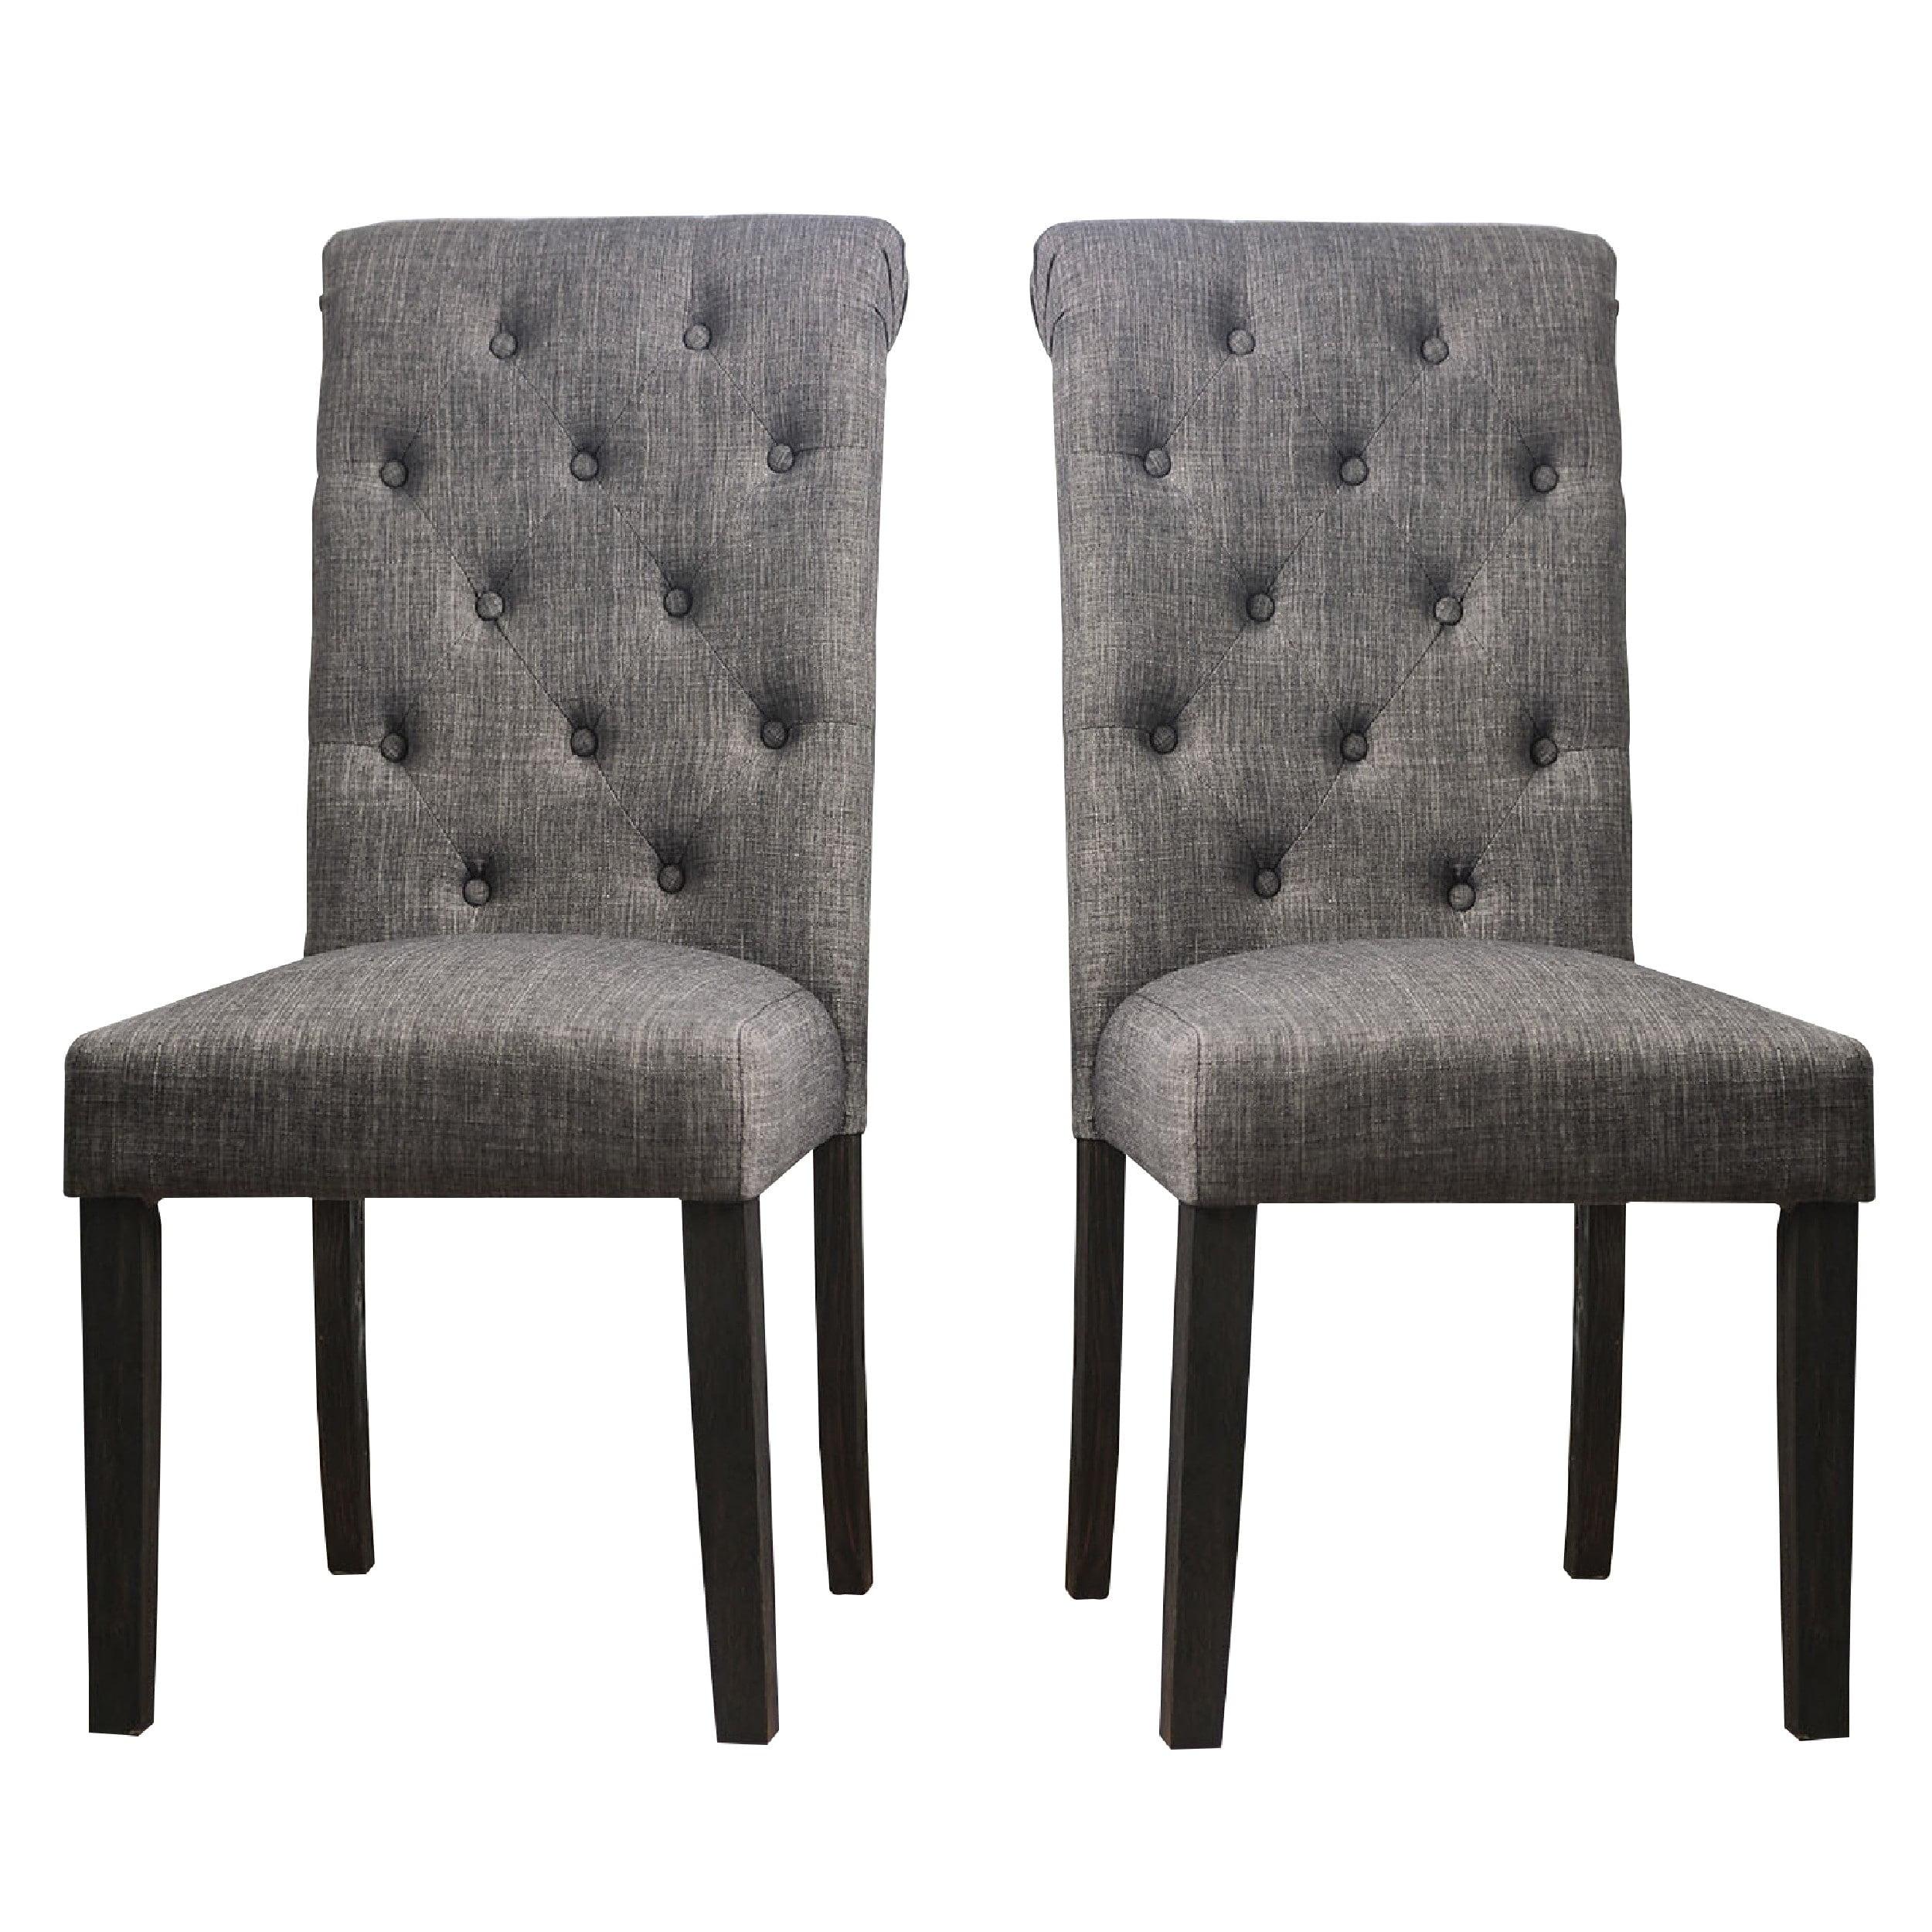 Elegant Gray Upholstered Dining Chair with Button-Tufted Back